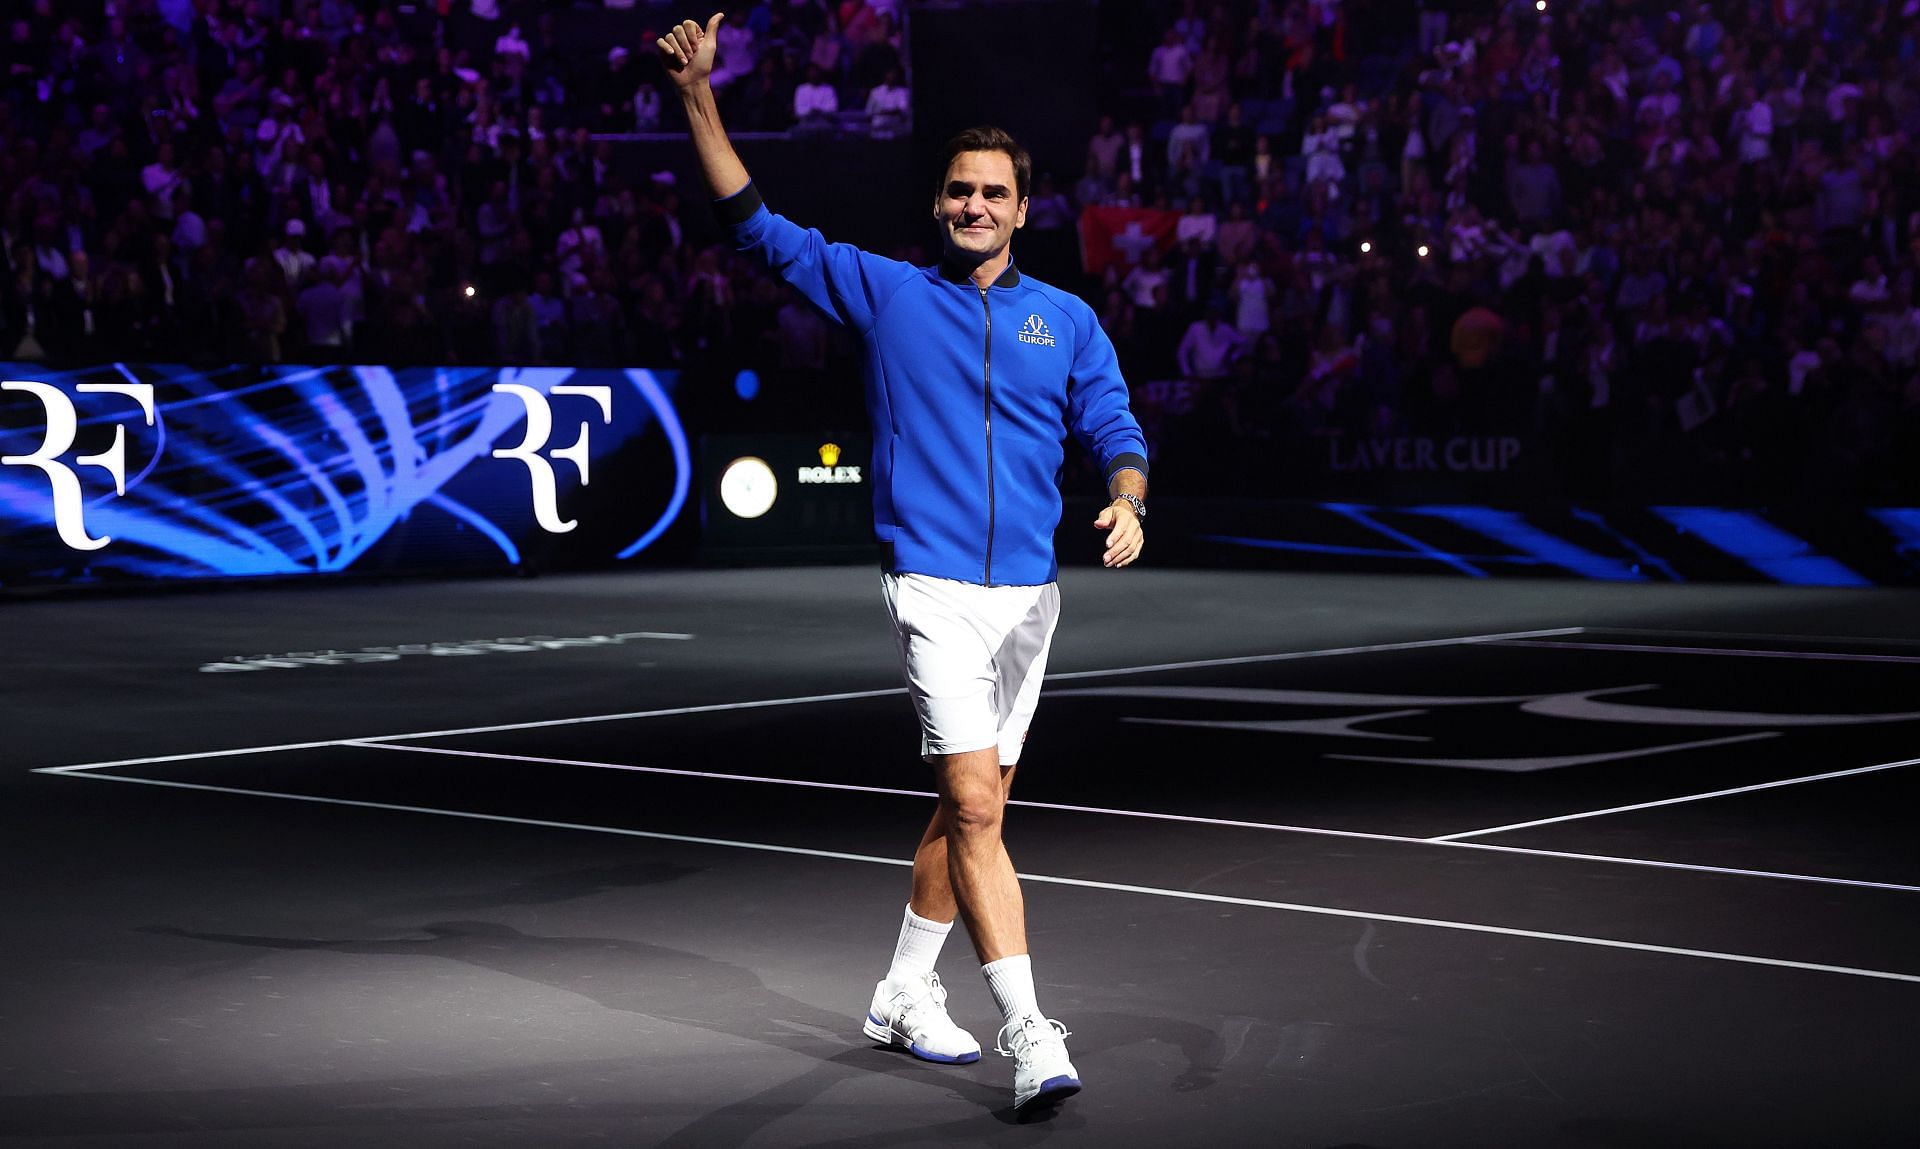 Roger Federer pictured at the 2022 Laver Cup in London.